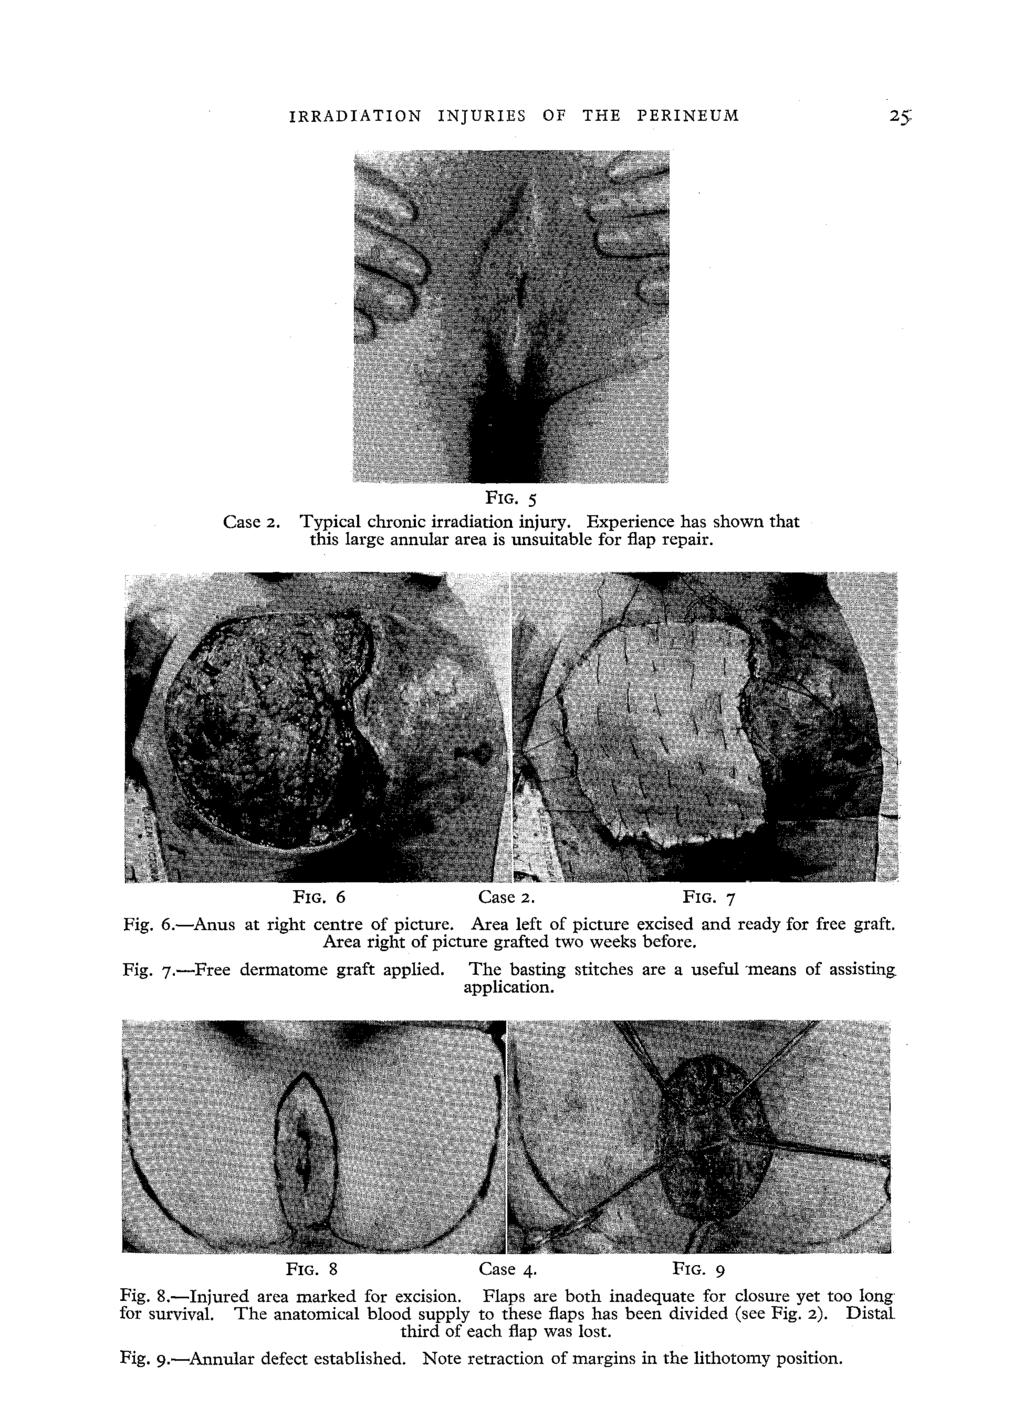 IRRADIATION C a s e 2. INJURIES OF THE PERINEUM 2~; FIG. 5 Typical chronic irradiation injury.